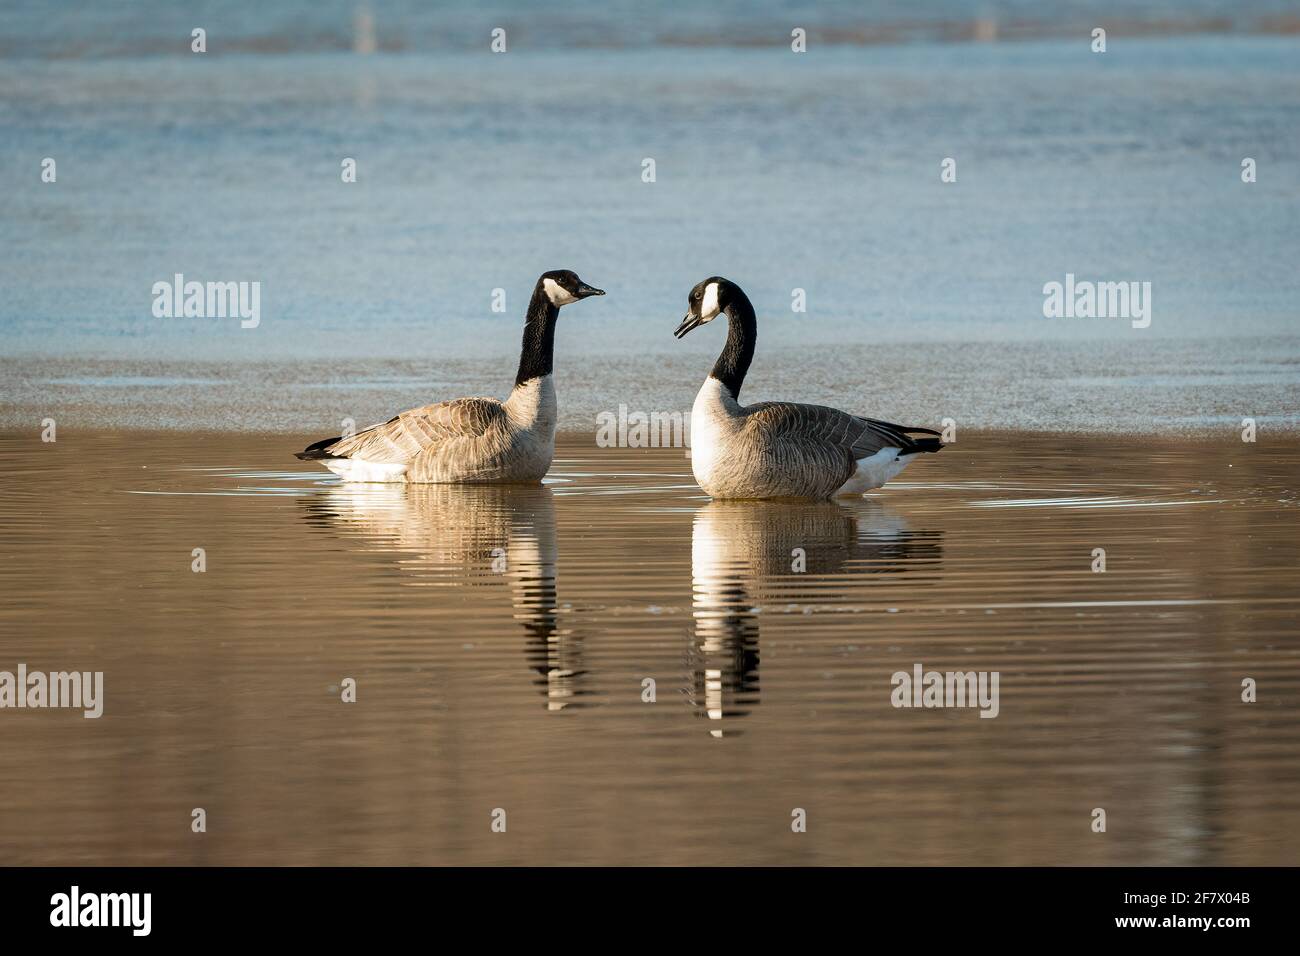 A pair of Canada Geese share an early morning moment on a small pond in the west Jacksonport sand and gravel pit located in Door County Wisconsin. Stock Photo